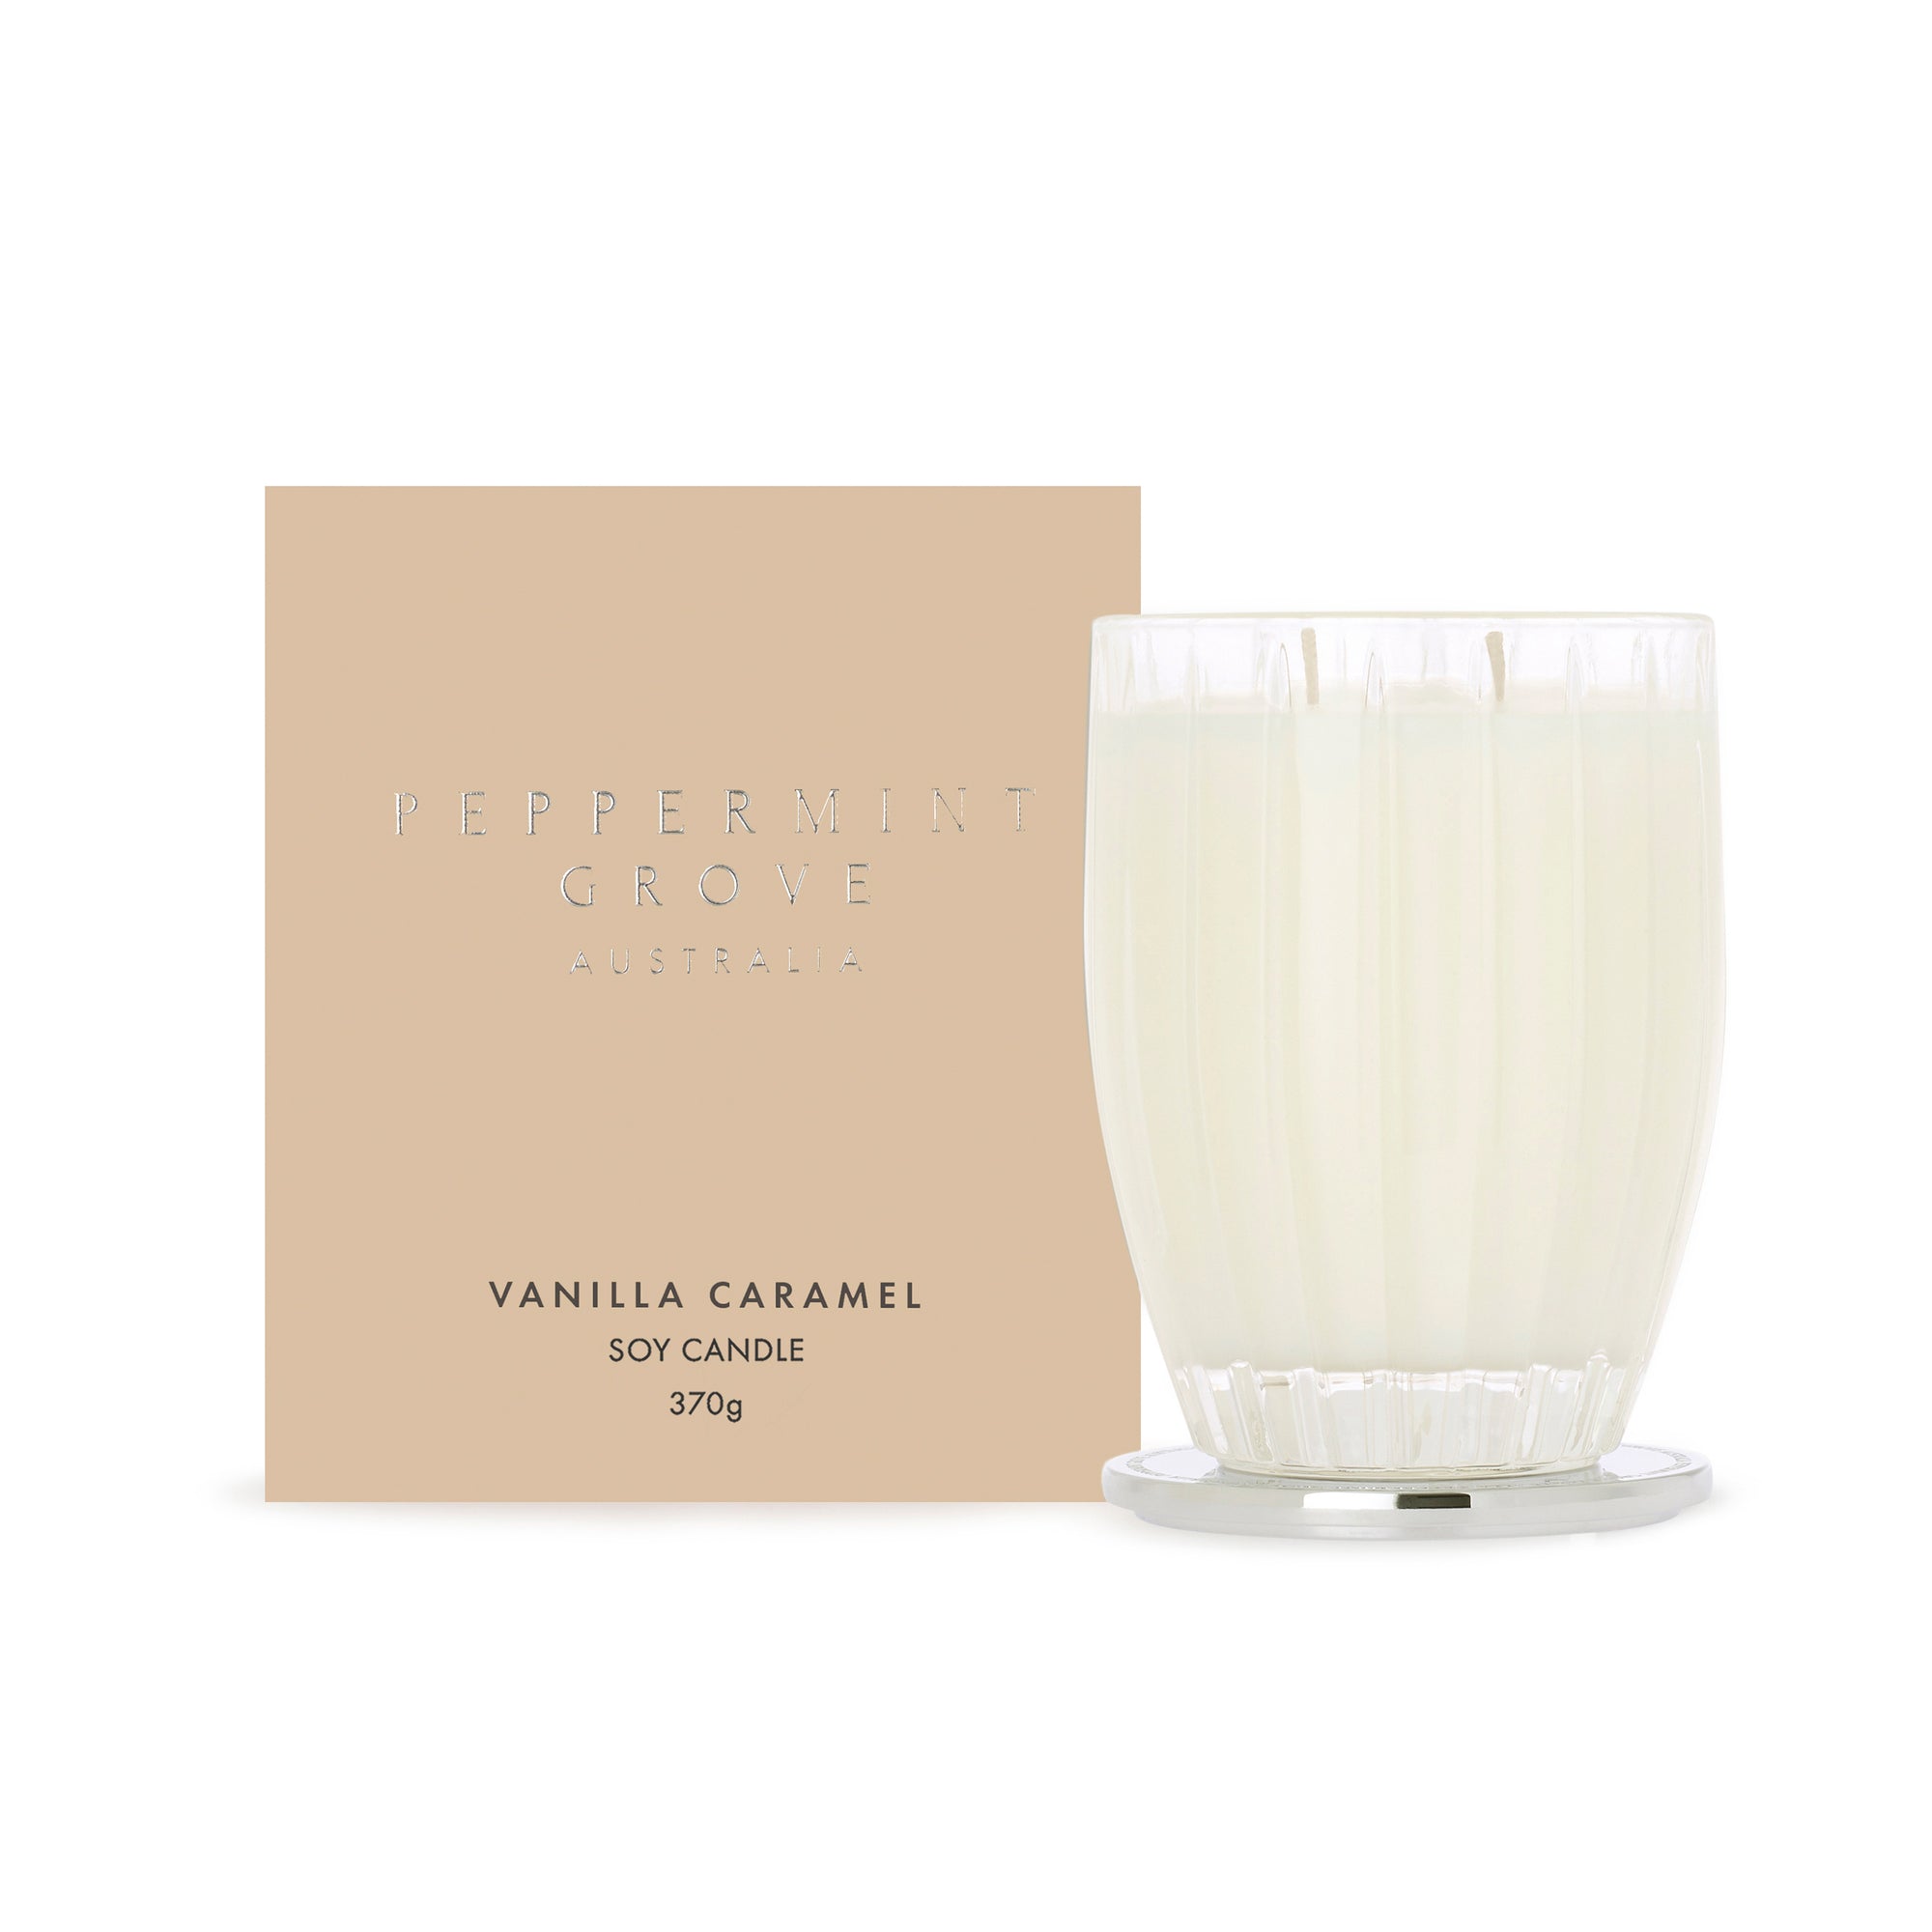 Peppermint Grove Vanilla Caramel Large Soy Candle 370g